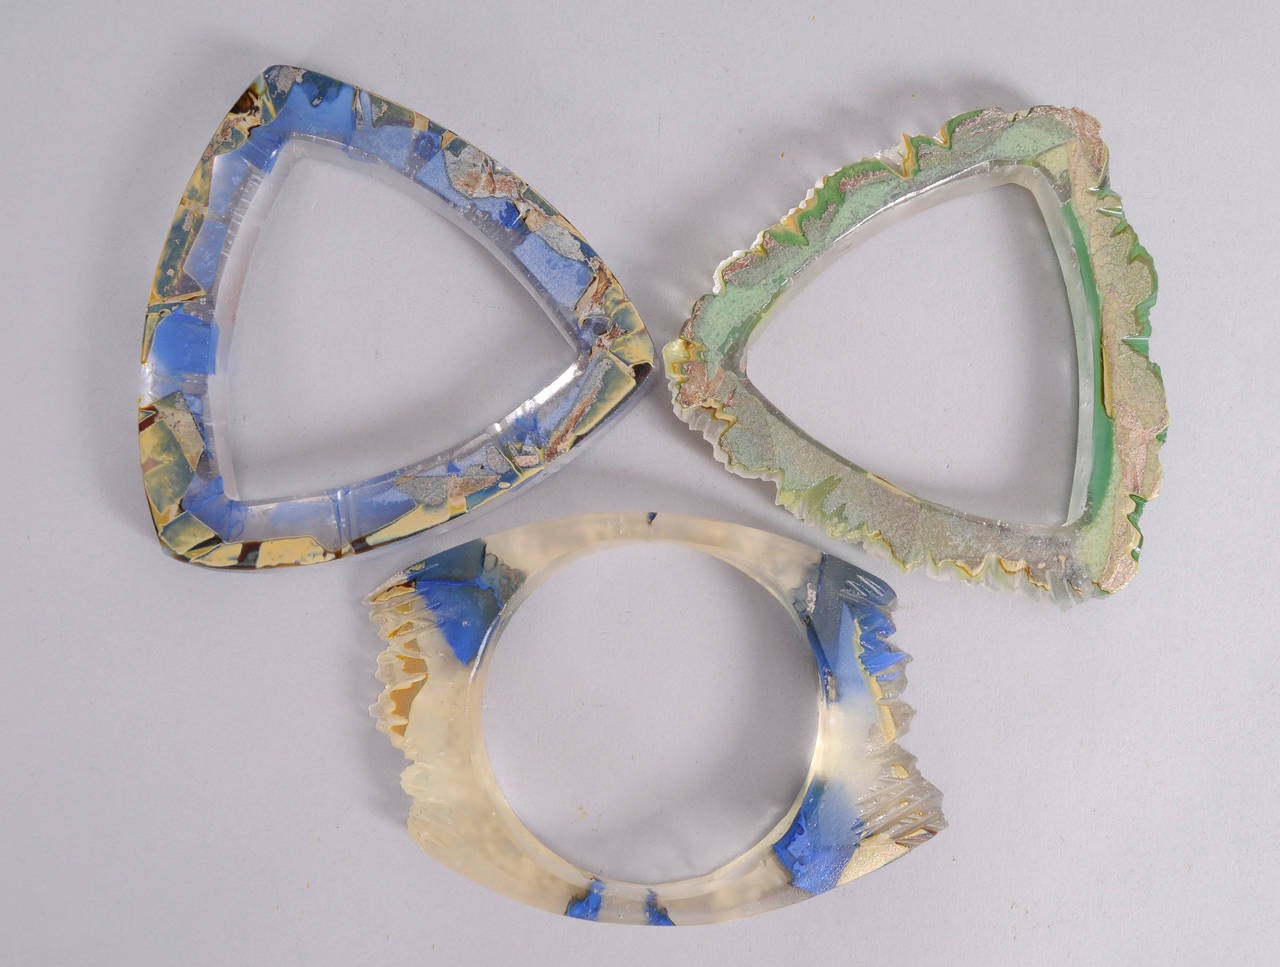 These unusual art glass bracelets are carved and polished to show off all of the gorgeous colors. Done in shades of blue and green they are reminiscent of beach glass. Two are shaped like a triangle and the oval one is signed. They are in excellent